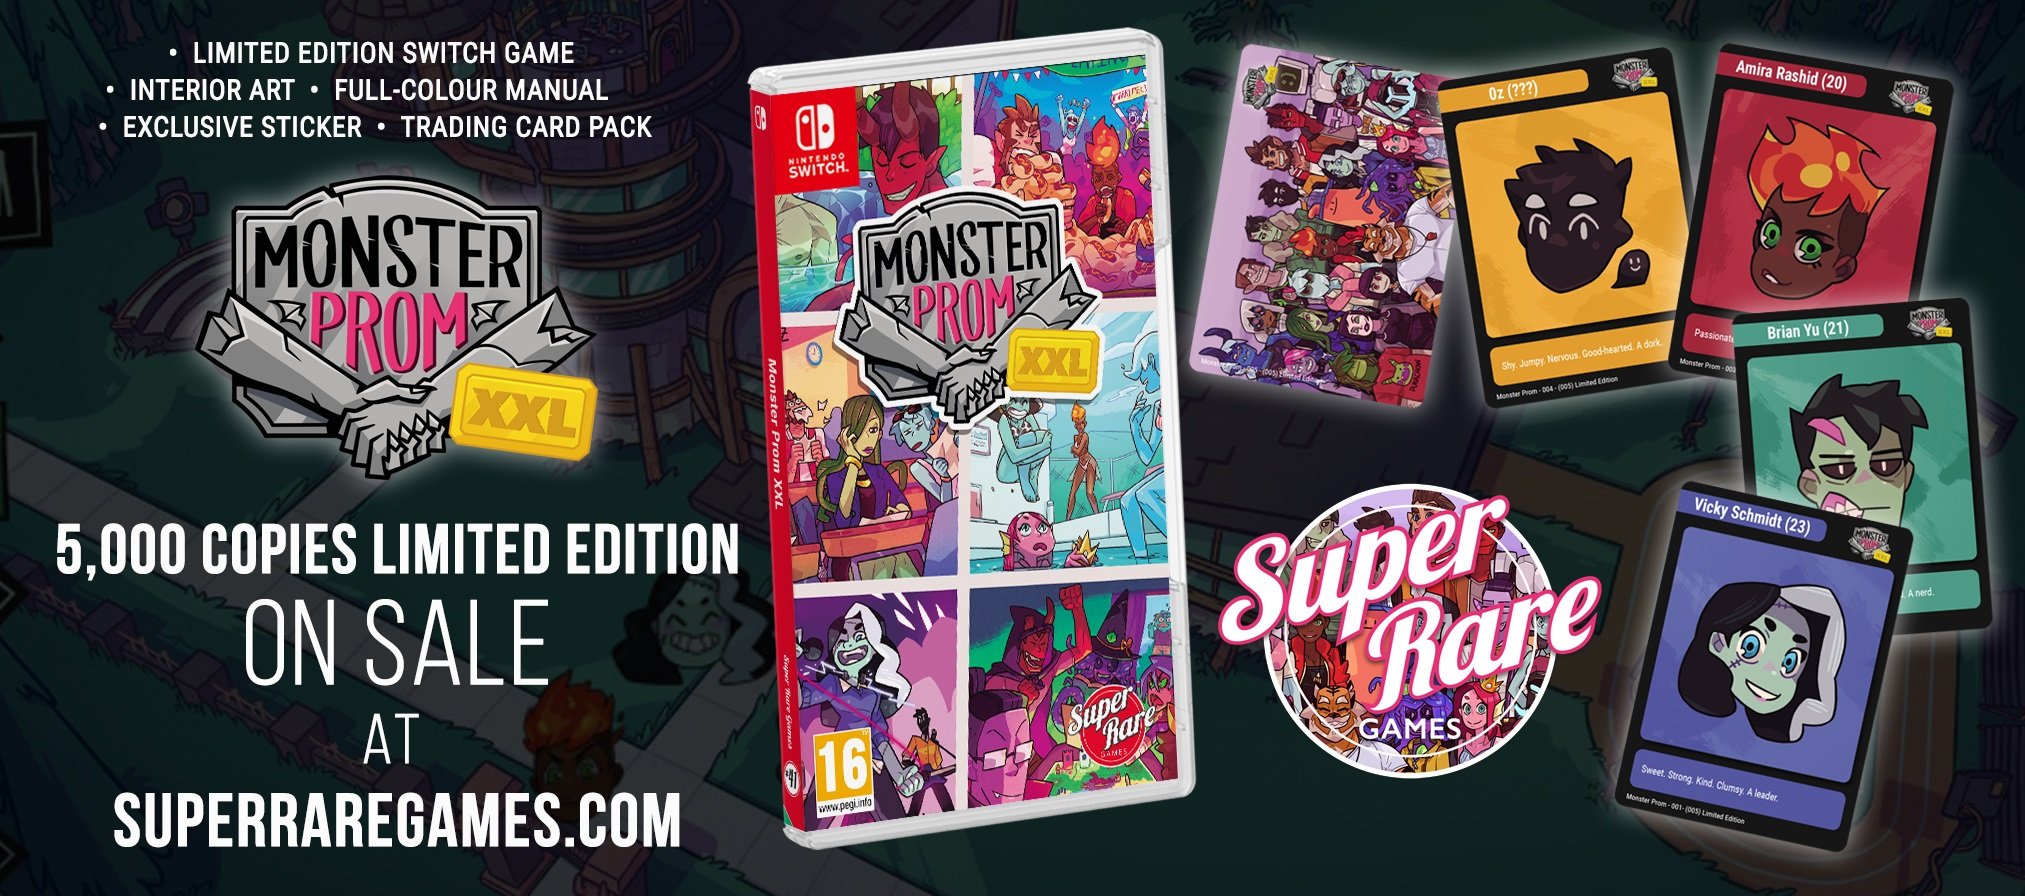 Le concours Monster Prom XXL Super Rare Games Switch gagne Destructoid